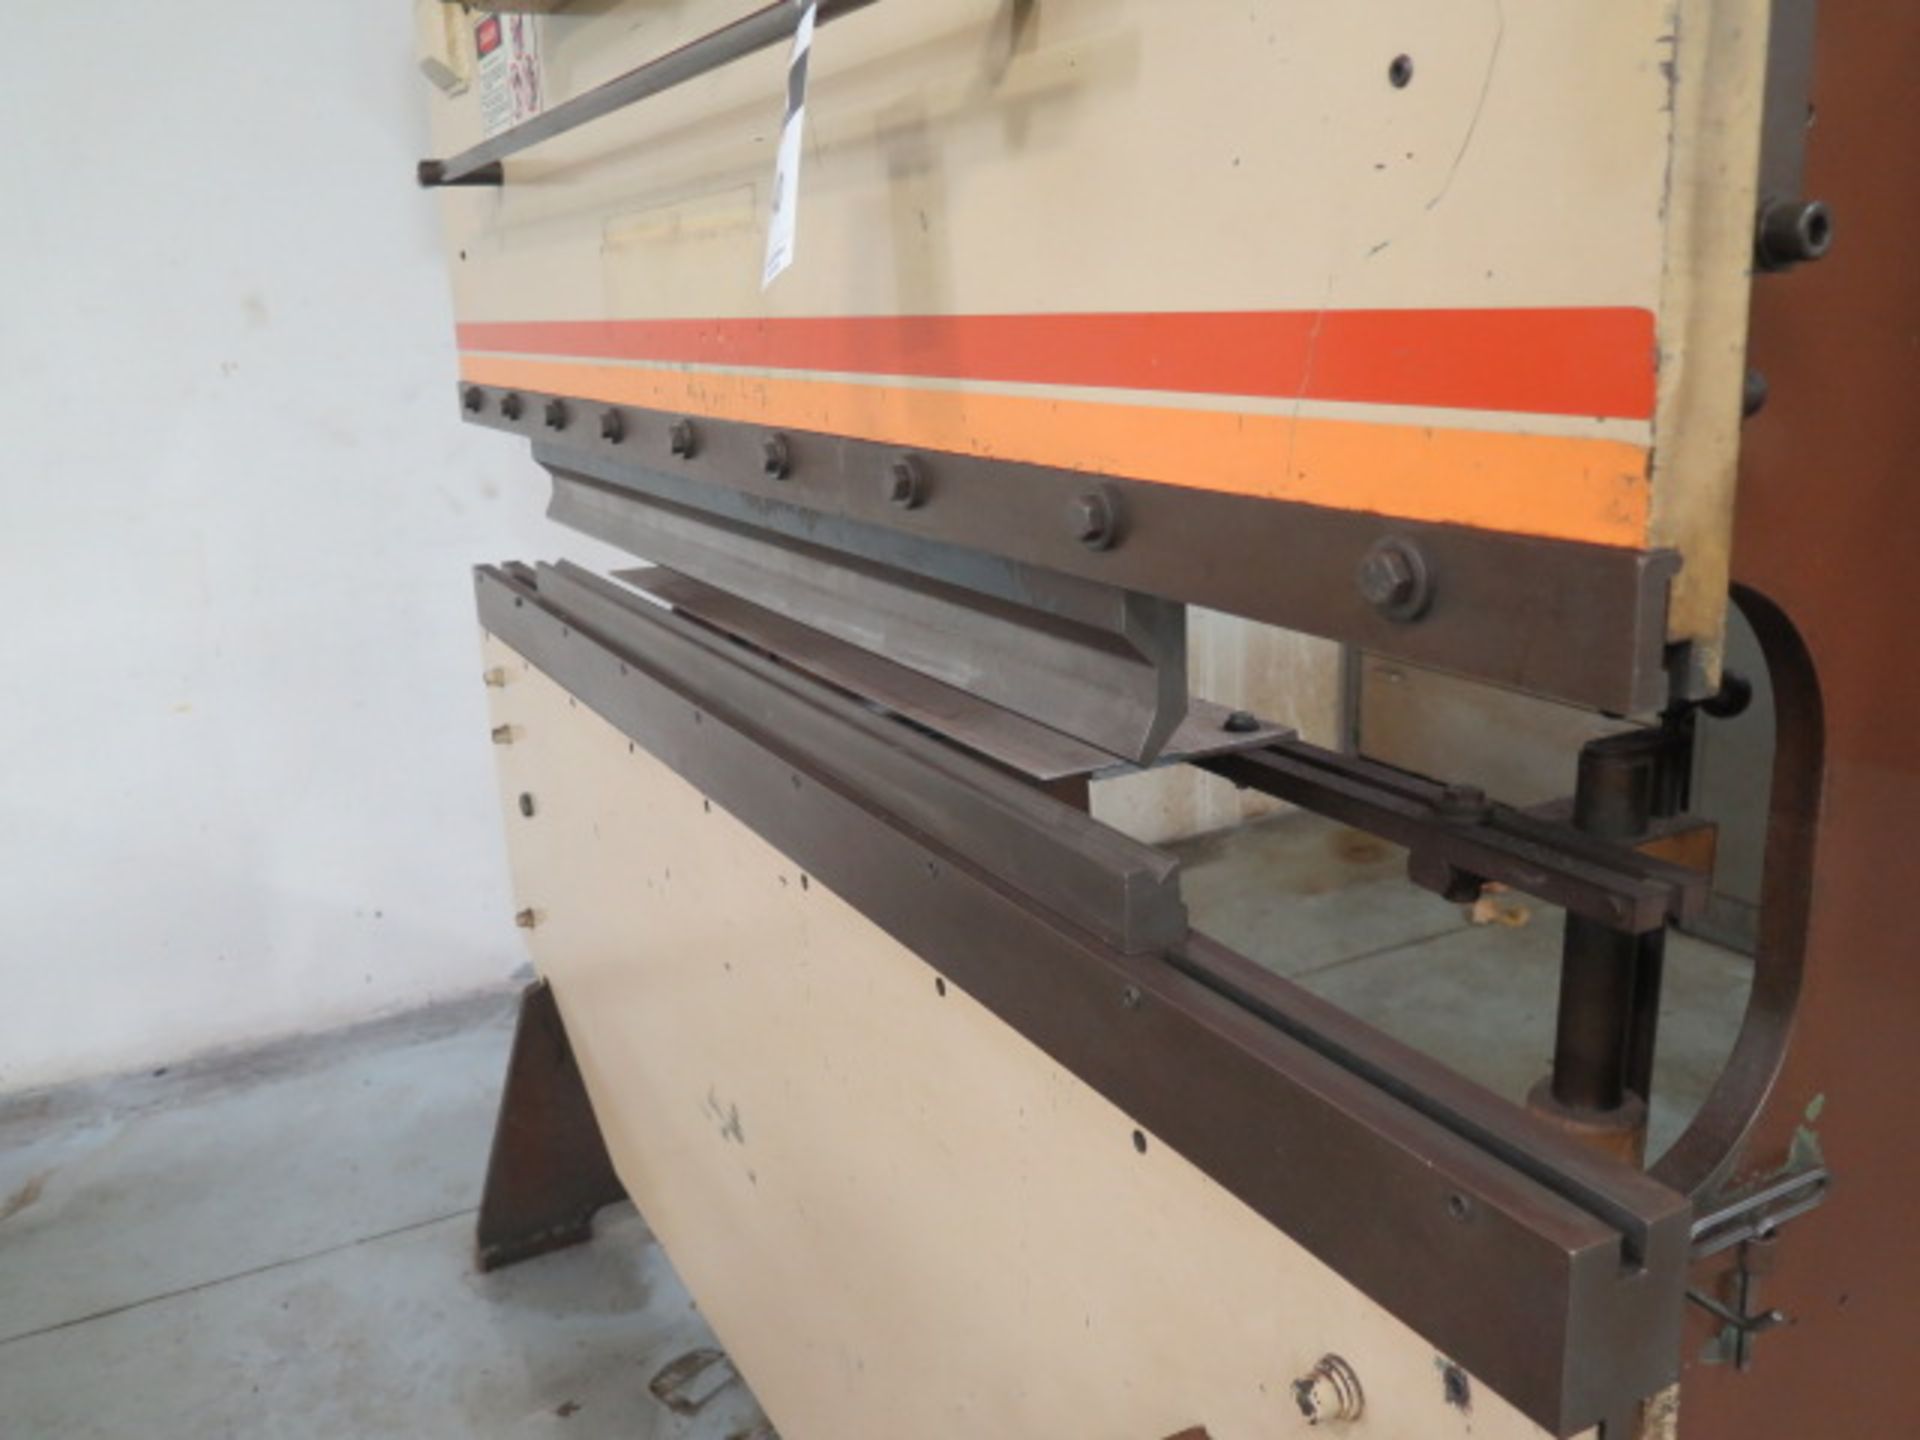 DiAcro 4-7272” Press Brake w/ Dial Back Gage, 72” Length, This Item is Sold AS IS and NO Warranty. - Image 4 of 10